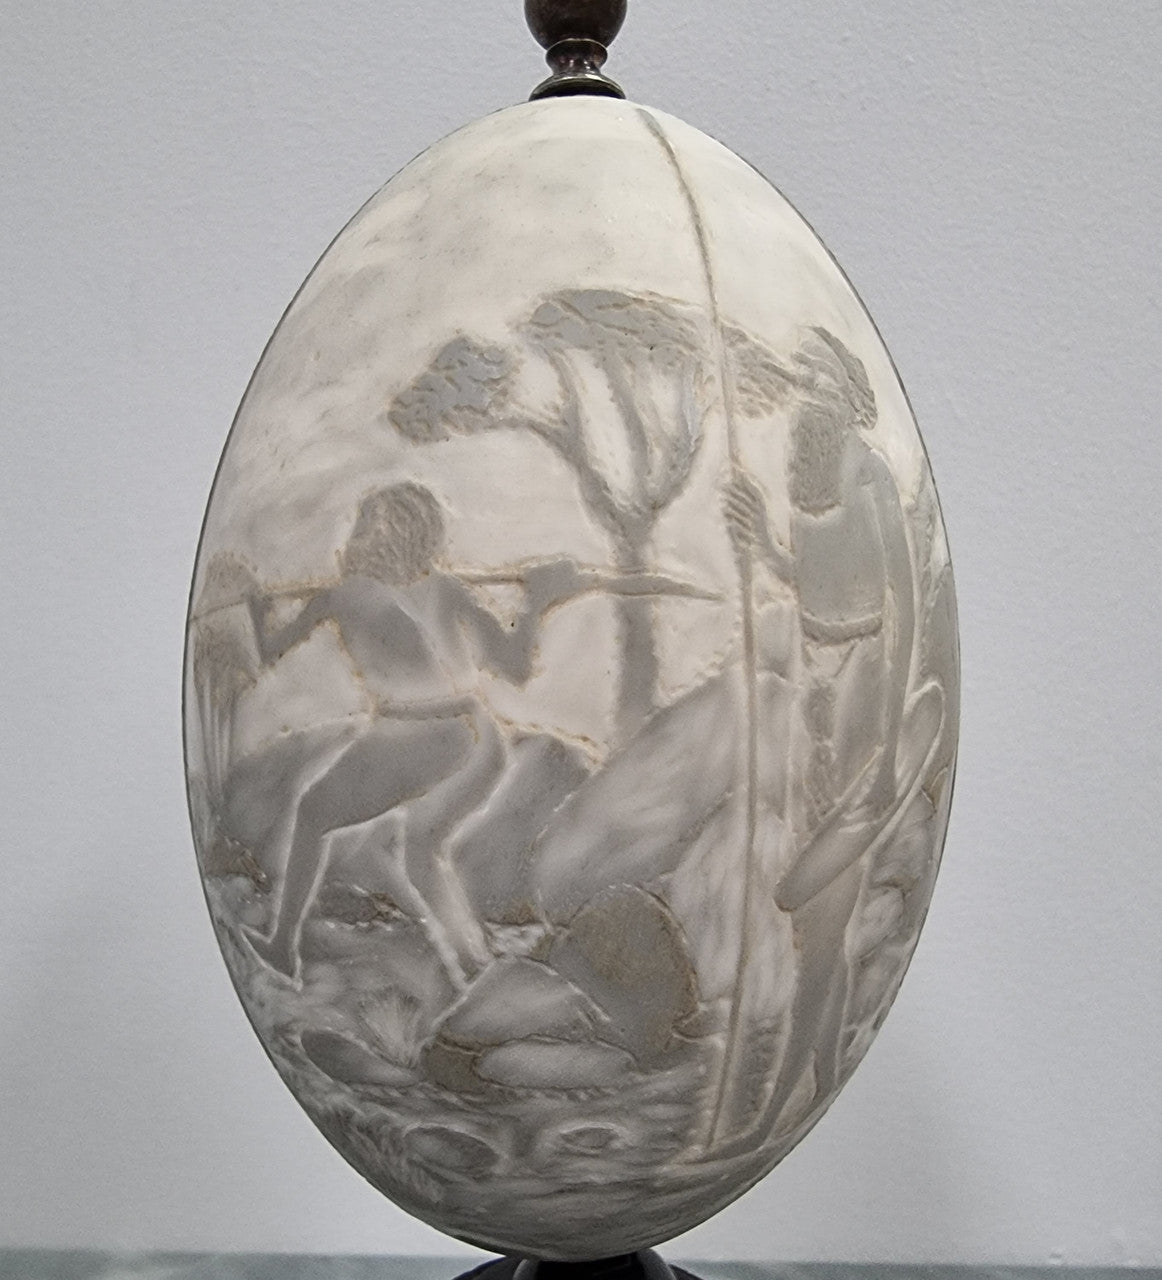 Superbly carved Emu egg on a emu metal and ebony base. It depicts an Aboriginal hunting scene and dreaming's. It is in good original condition, please view photos as they help form part of the description.